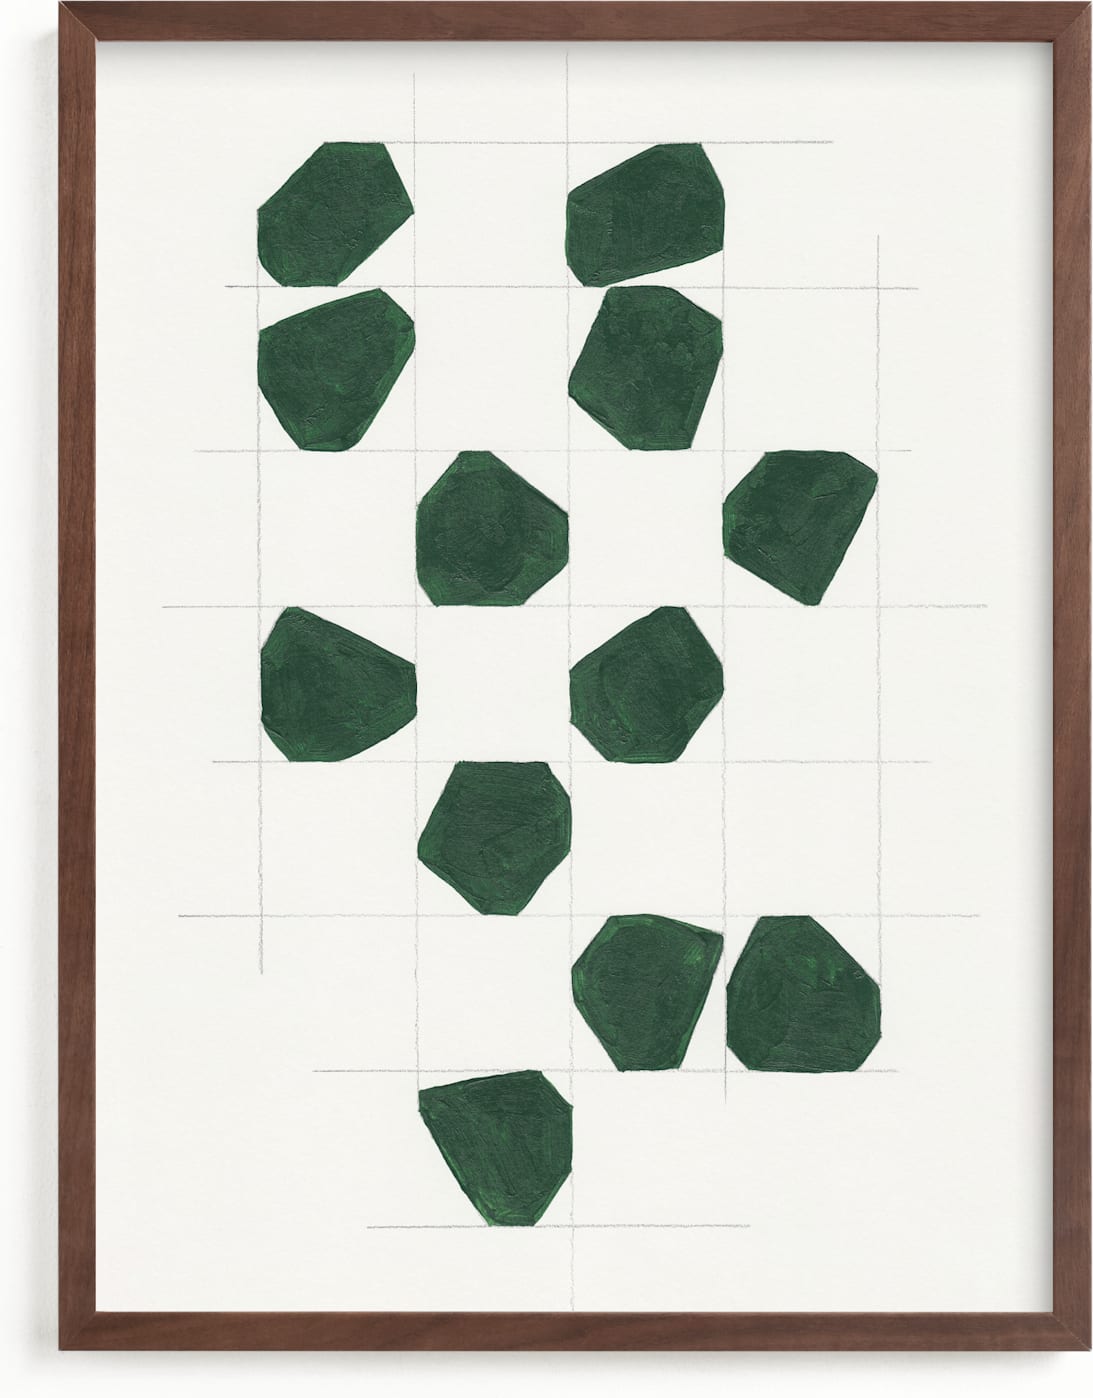 This is a white, grey, green art by Alisa Galitsyna called Within the Lines.